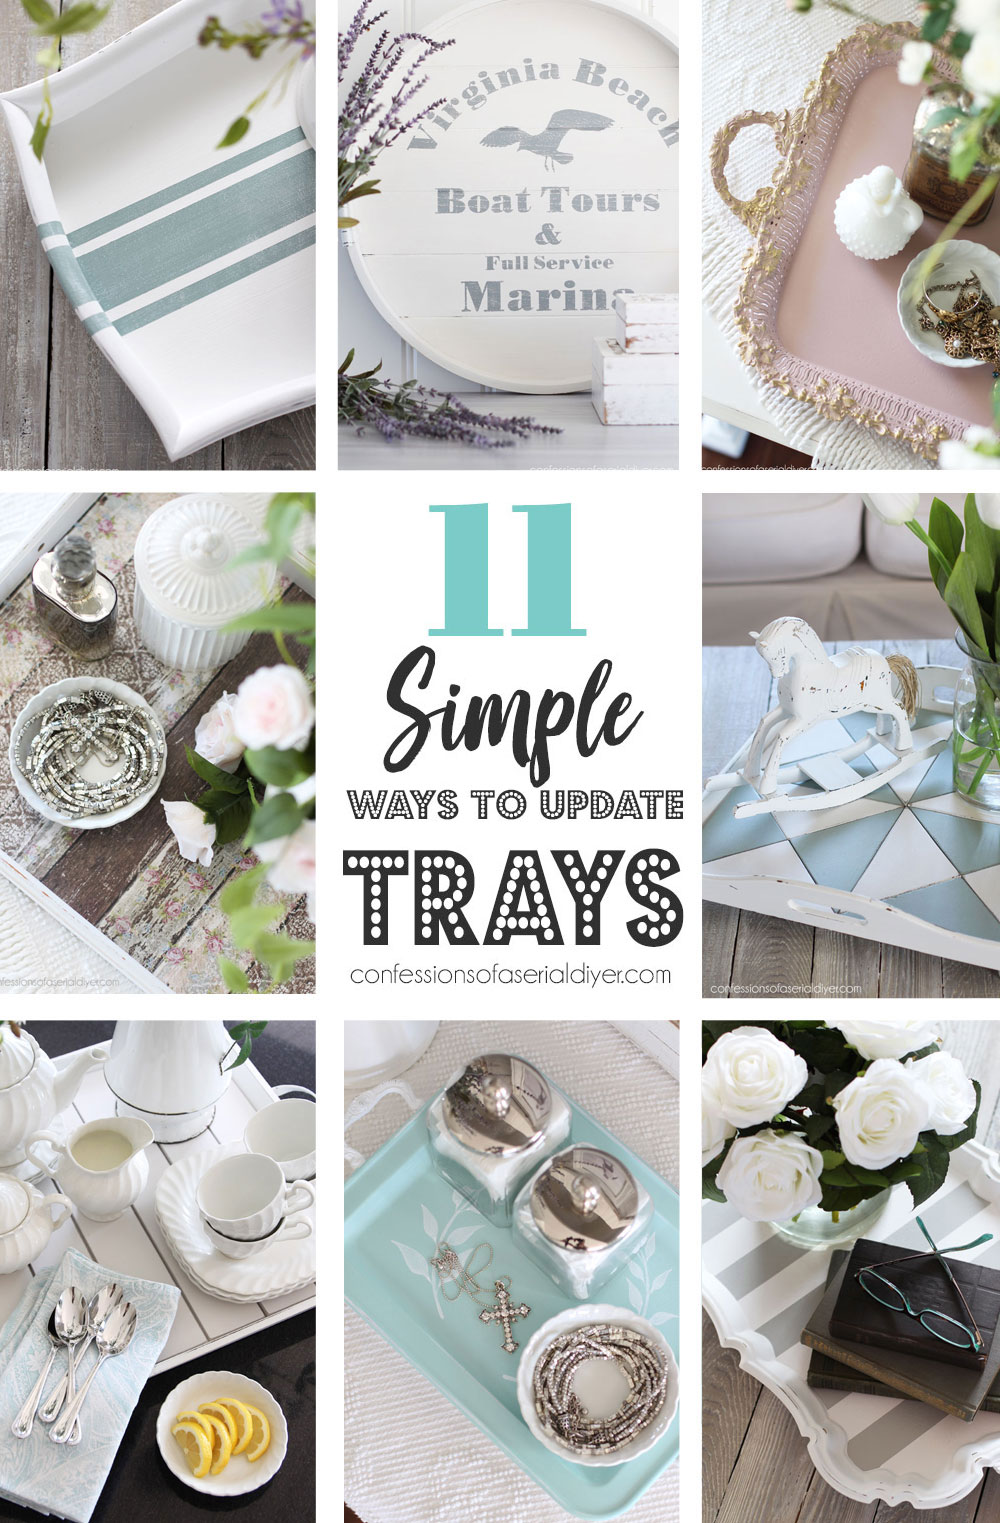 11 Simple Ways to Update Trays